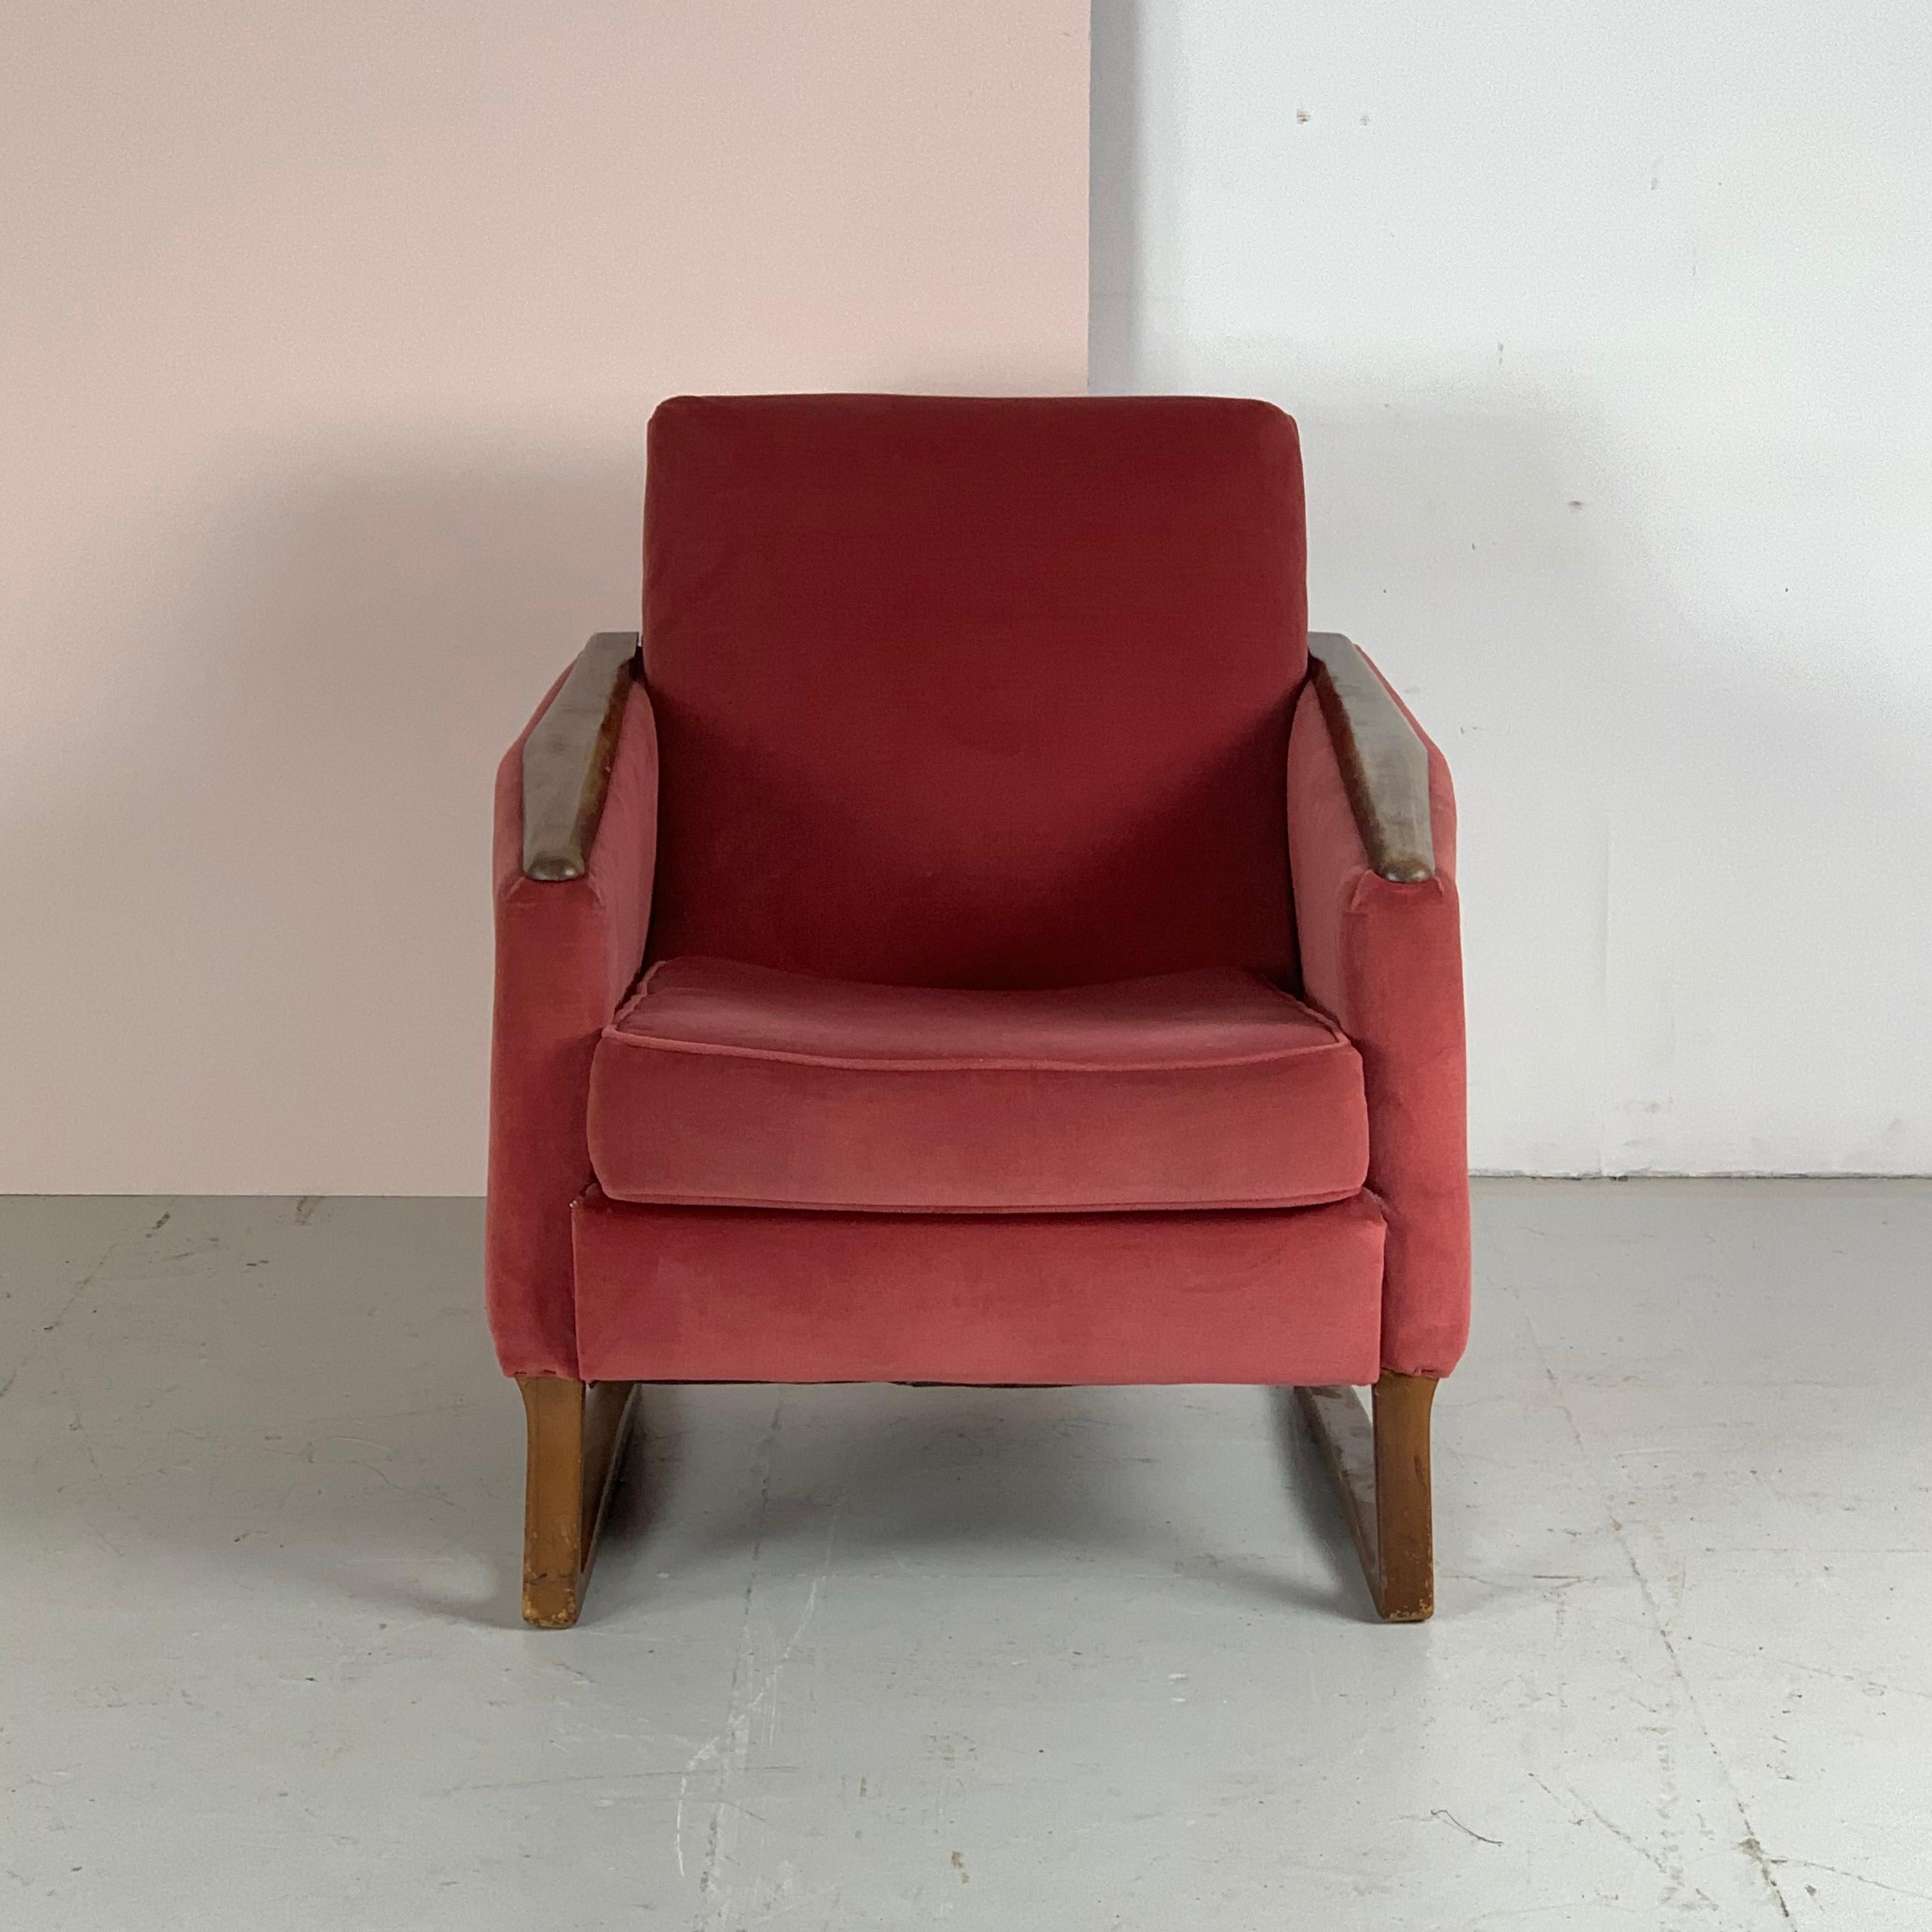 1950s French Velvet Armchair In Good Condition For Sale In Lewes, East Sussex